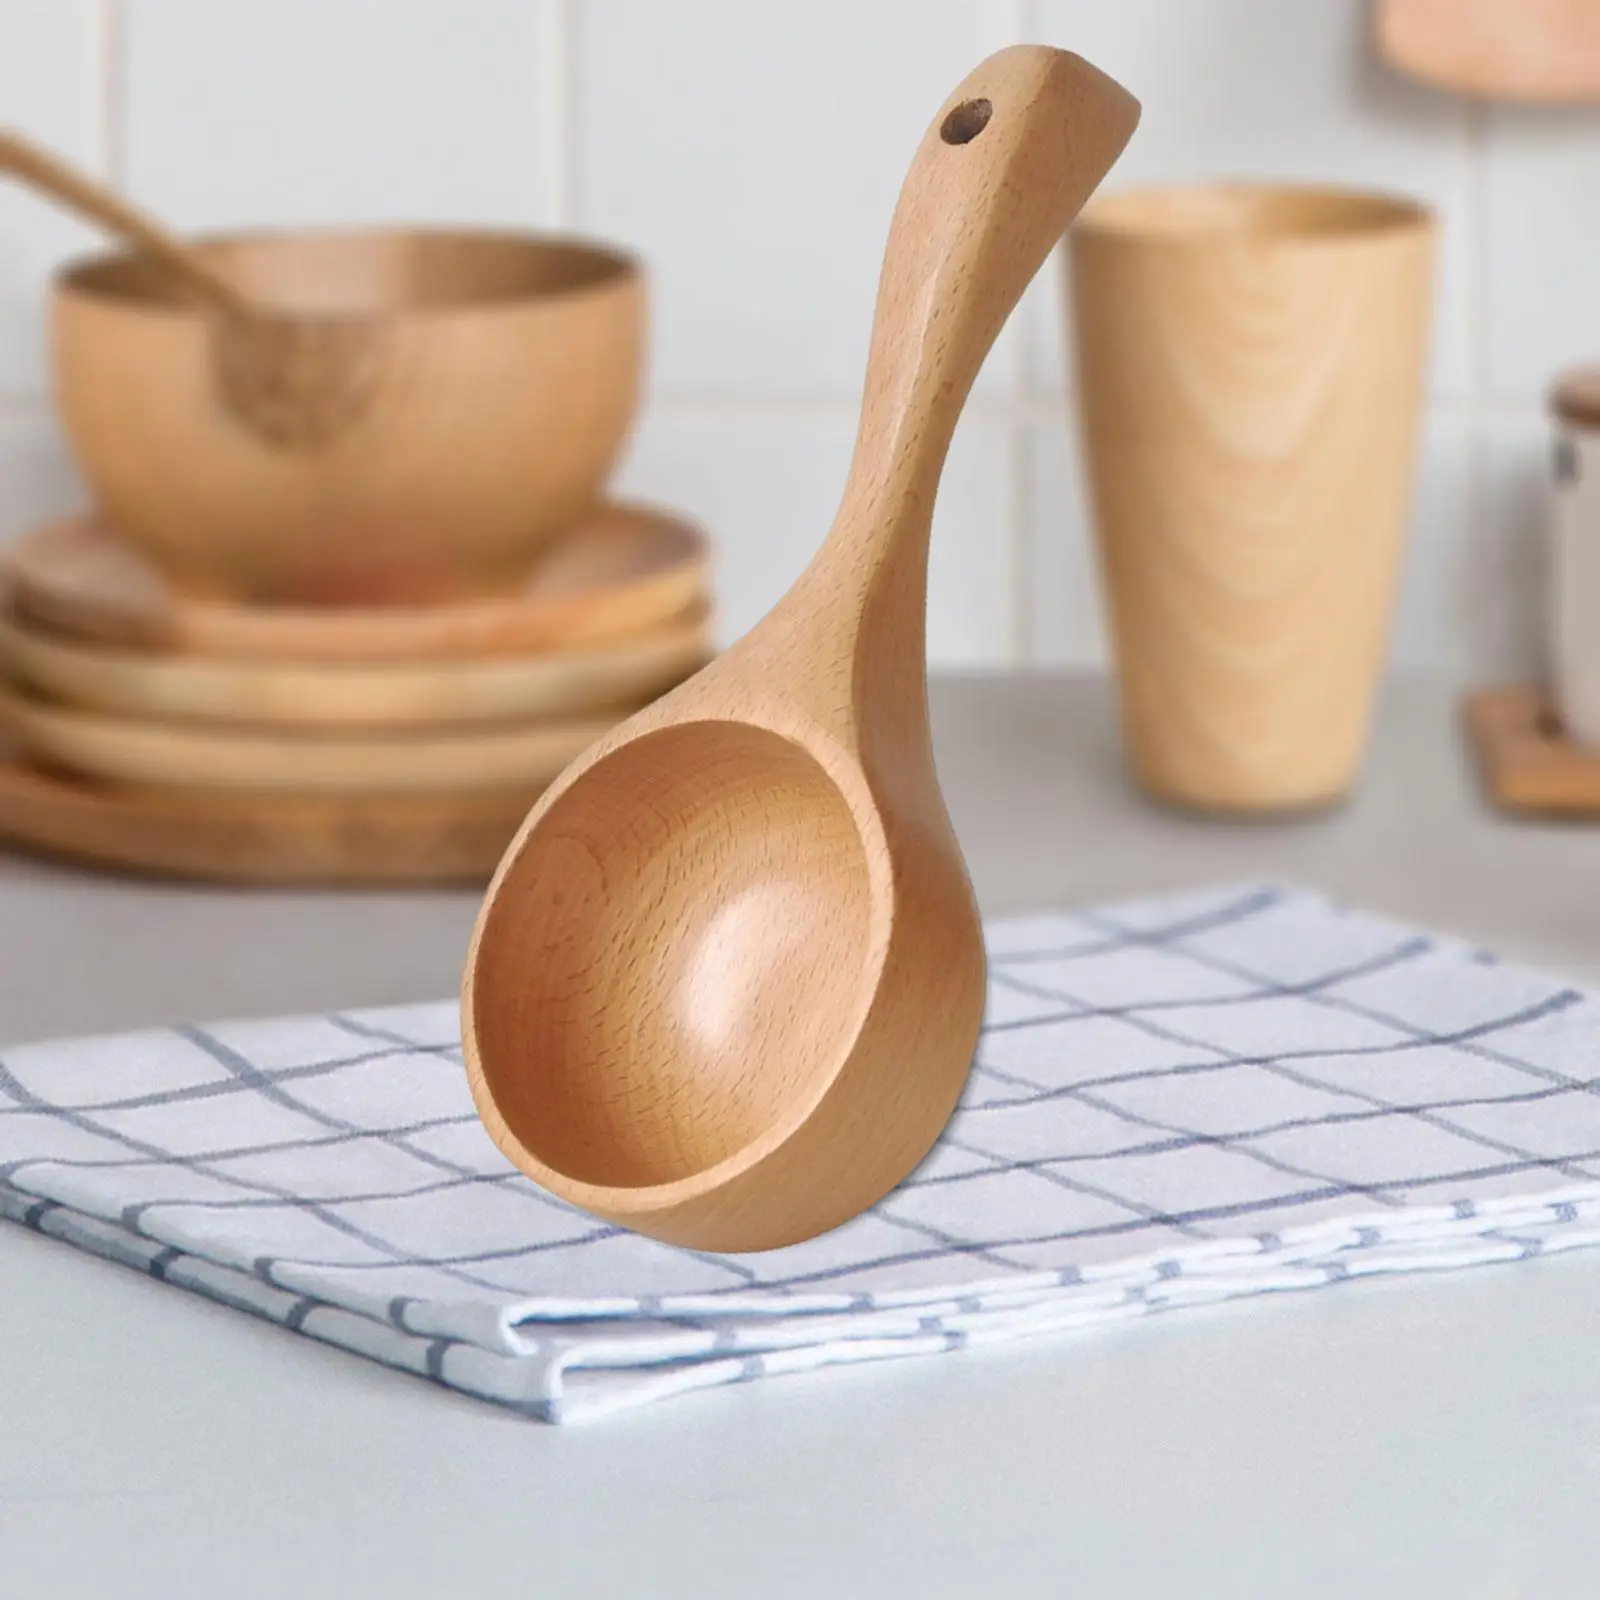 Multipurpose Wooden Ladle Spoon Handmade Kitchen Utensil Soup Spoon Water Spoon for Cooking Canisters Flour Rice Porridge Sauna